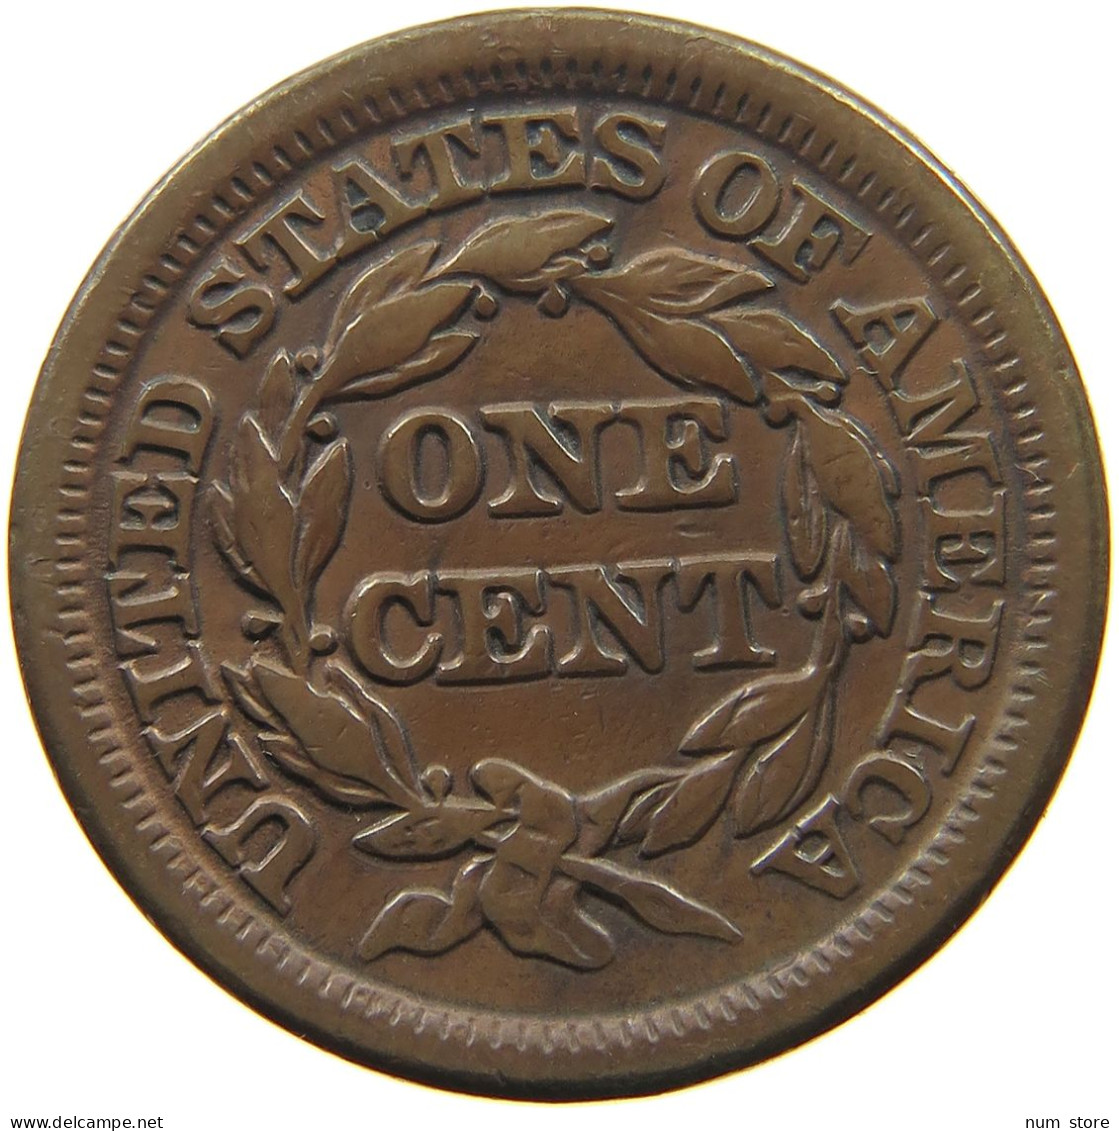 UNITED STATES OF AMERICA LARGE CENT 1848 BRAIDED HAIR #t141 0279 - 1840-1857: Braided Hair